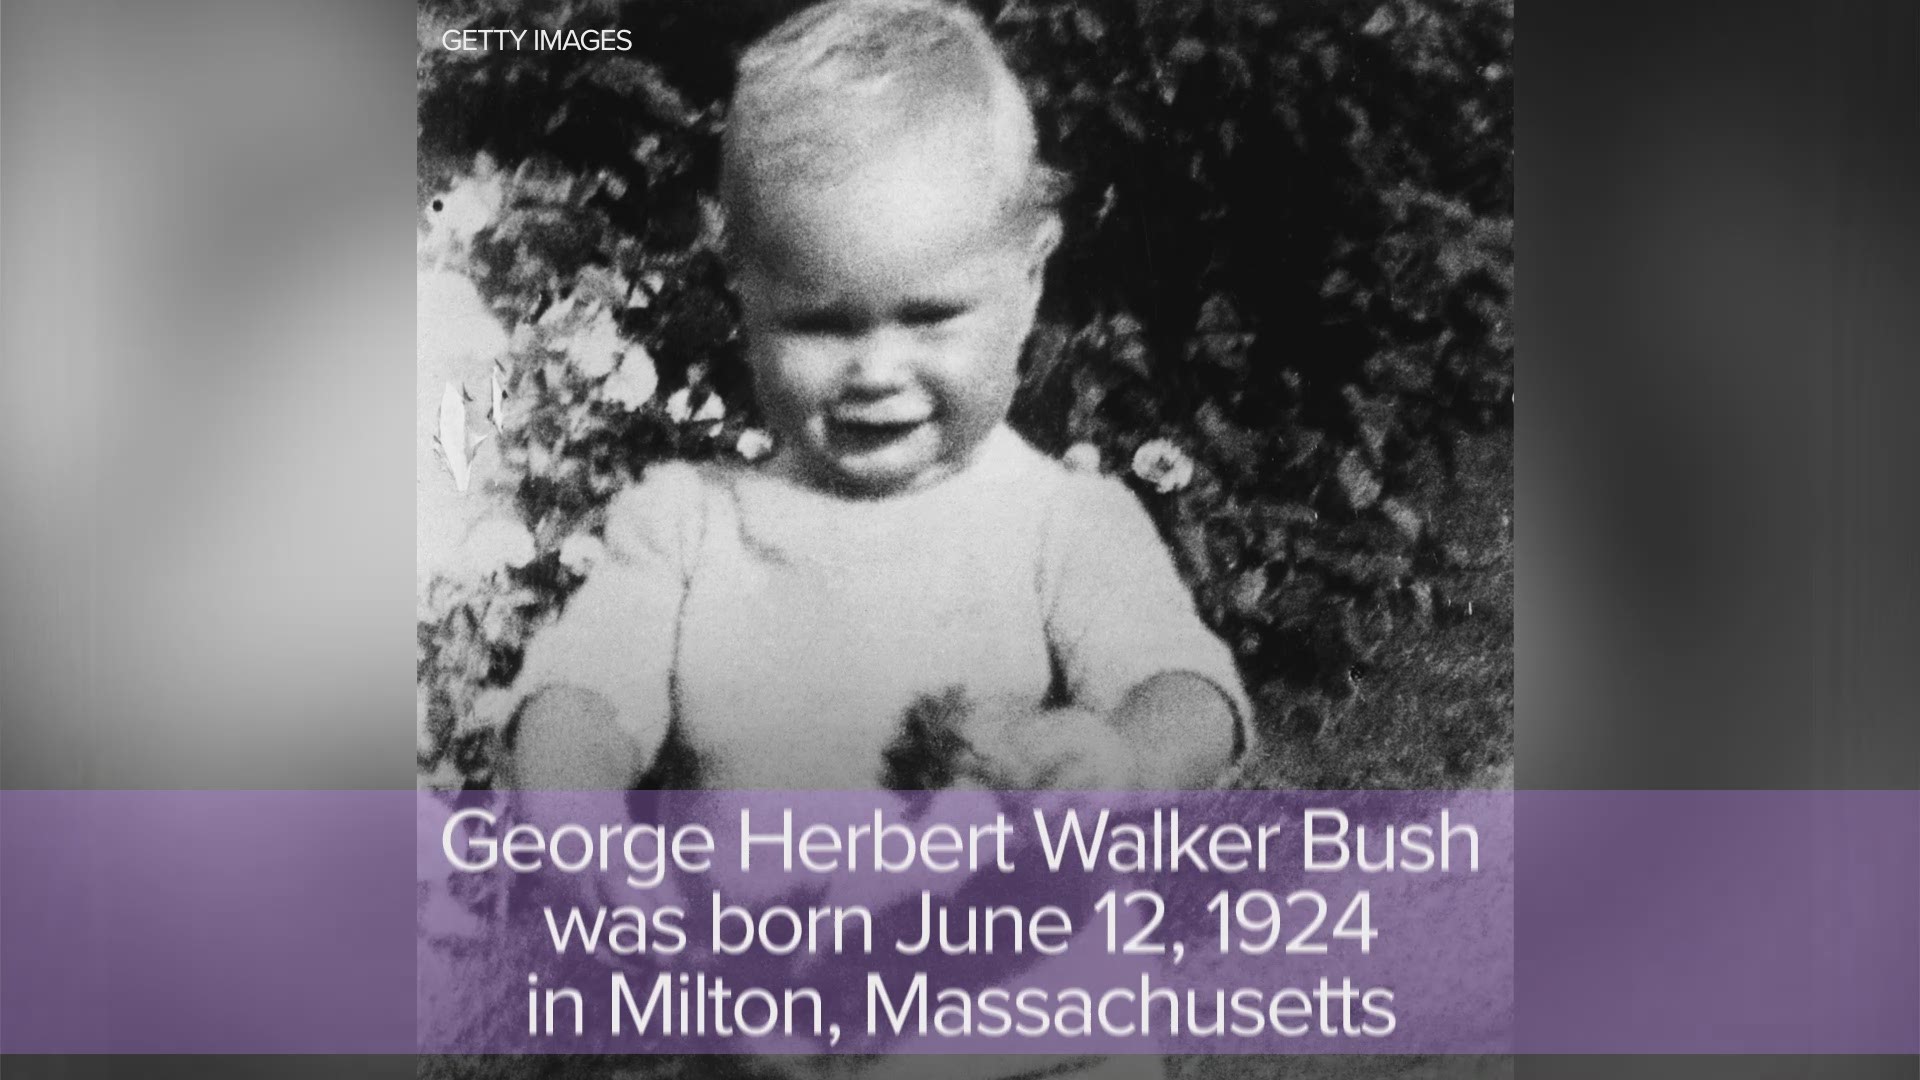 He is preceded in death by Barbara Pierce Bush, his wife of 73 years.